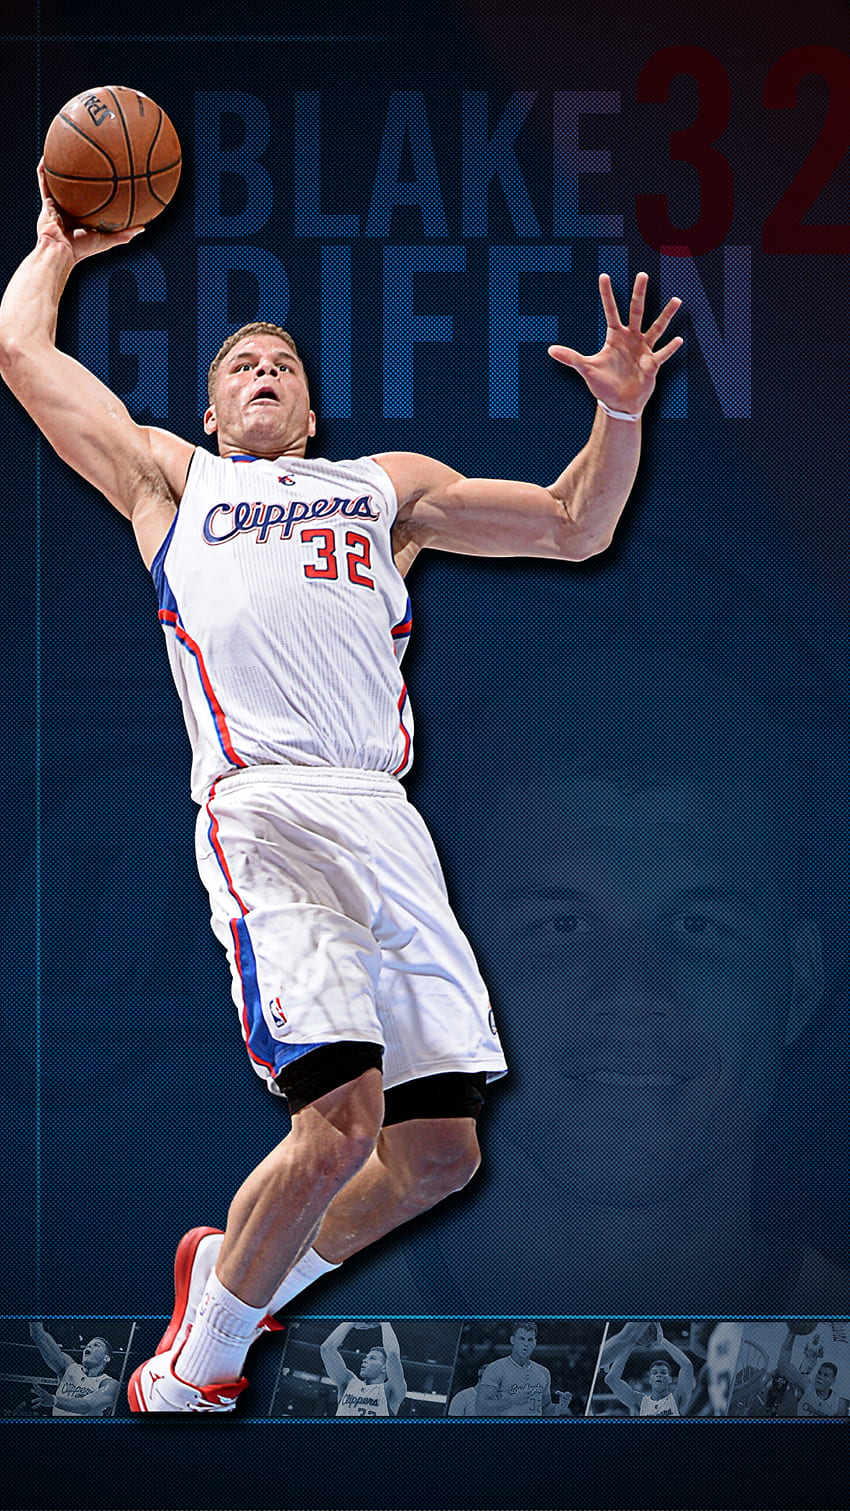 Blake Griffin Wallpaper for iPhone 11, Pro Max, X, 8, 7, 6 - Free